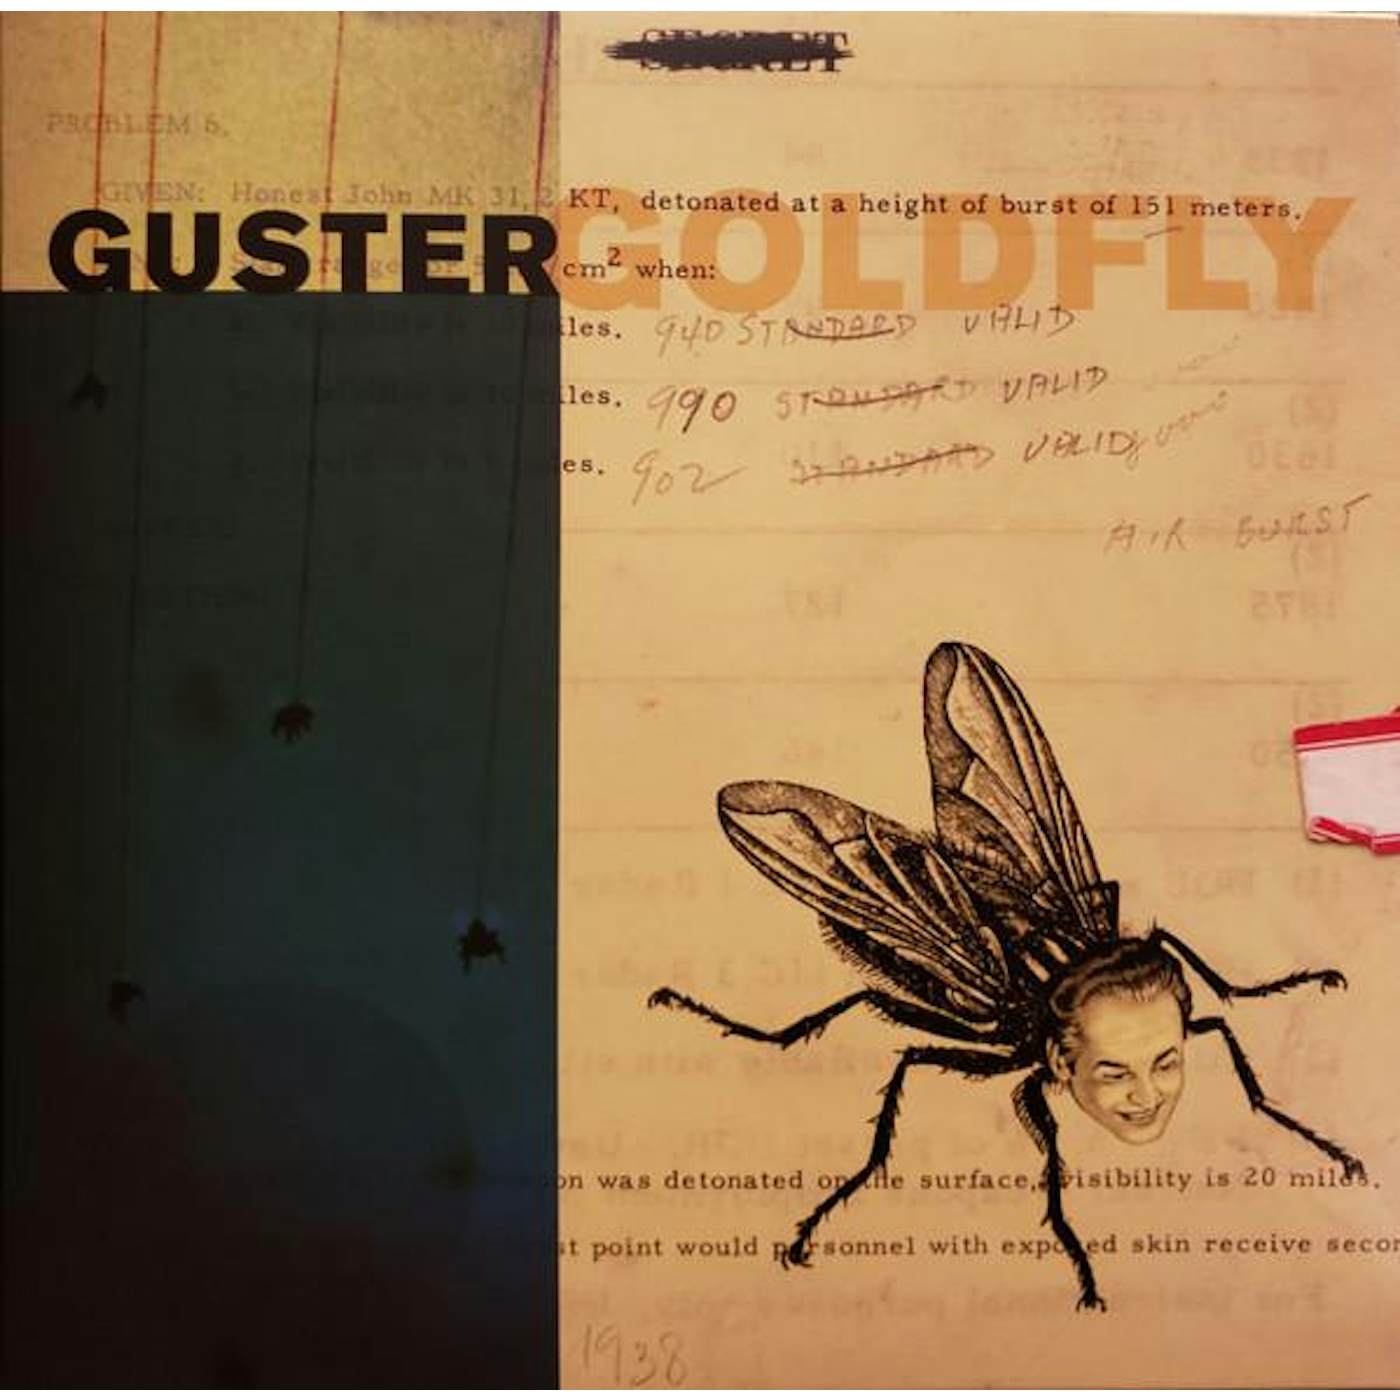 Guster Goldfly Vinyl Record